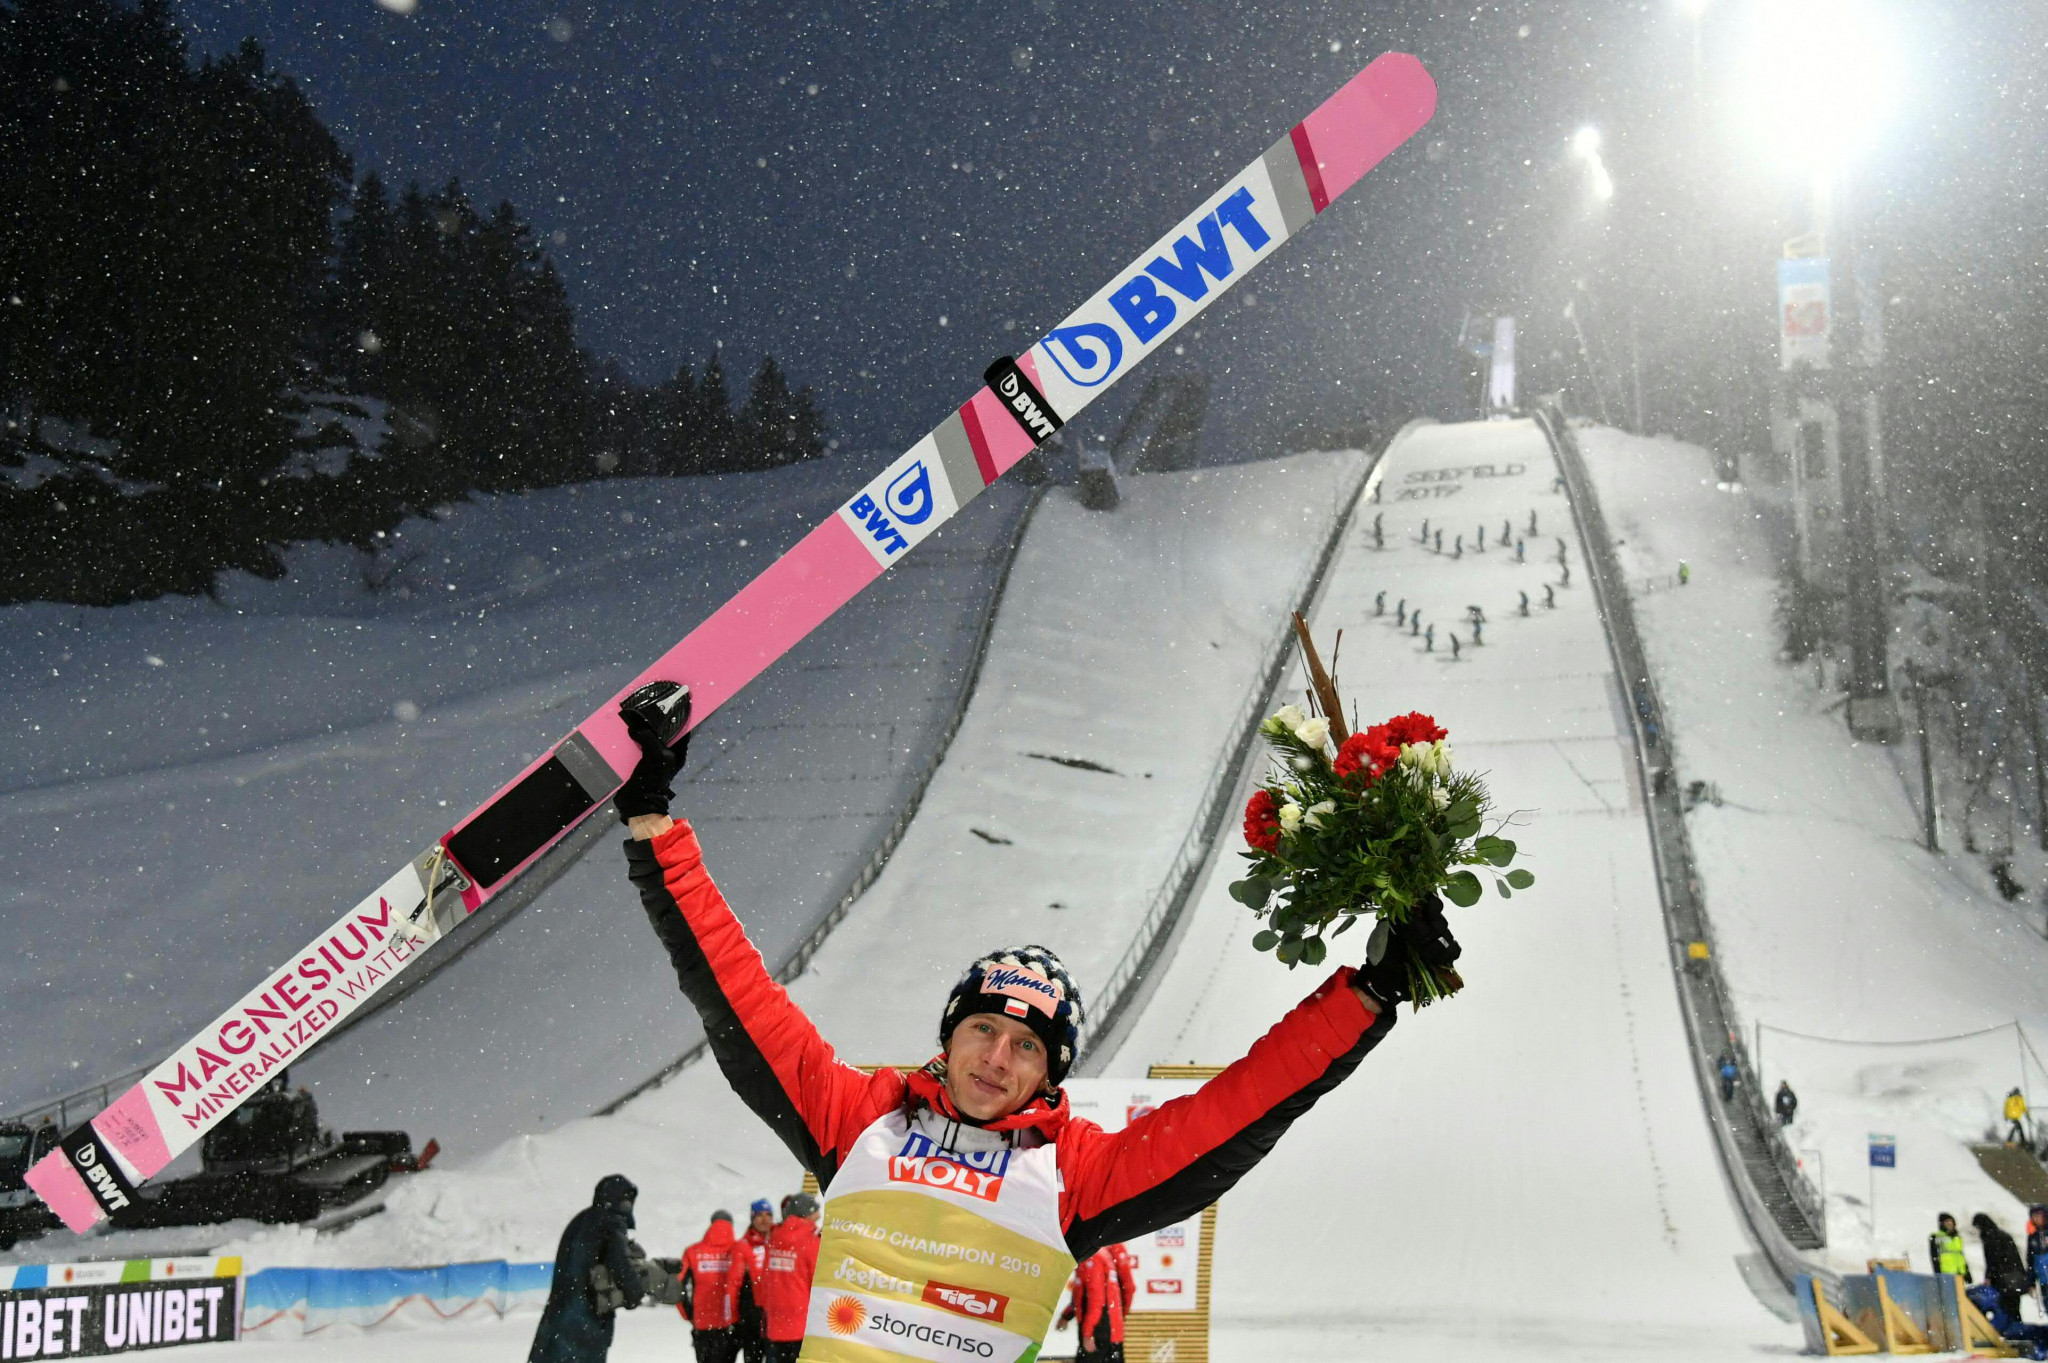 Poland's Dawid Kubacki upset the odds as he sealed his first major individual title with a shock triumph in the men's normal hill ski jumping event ©Getty Images